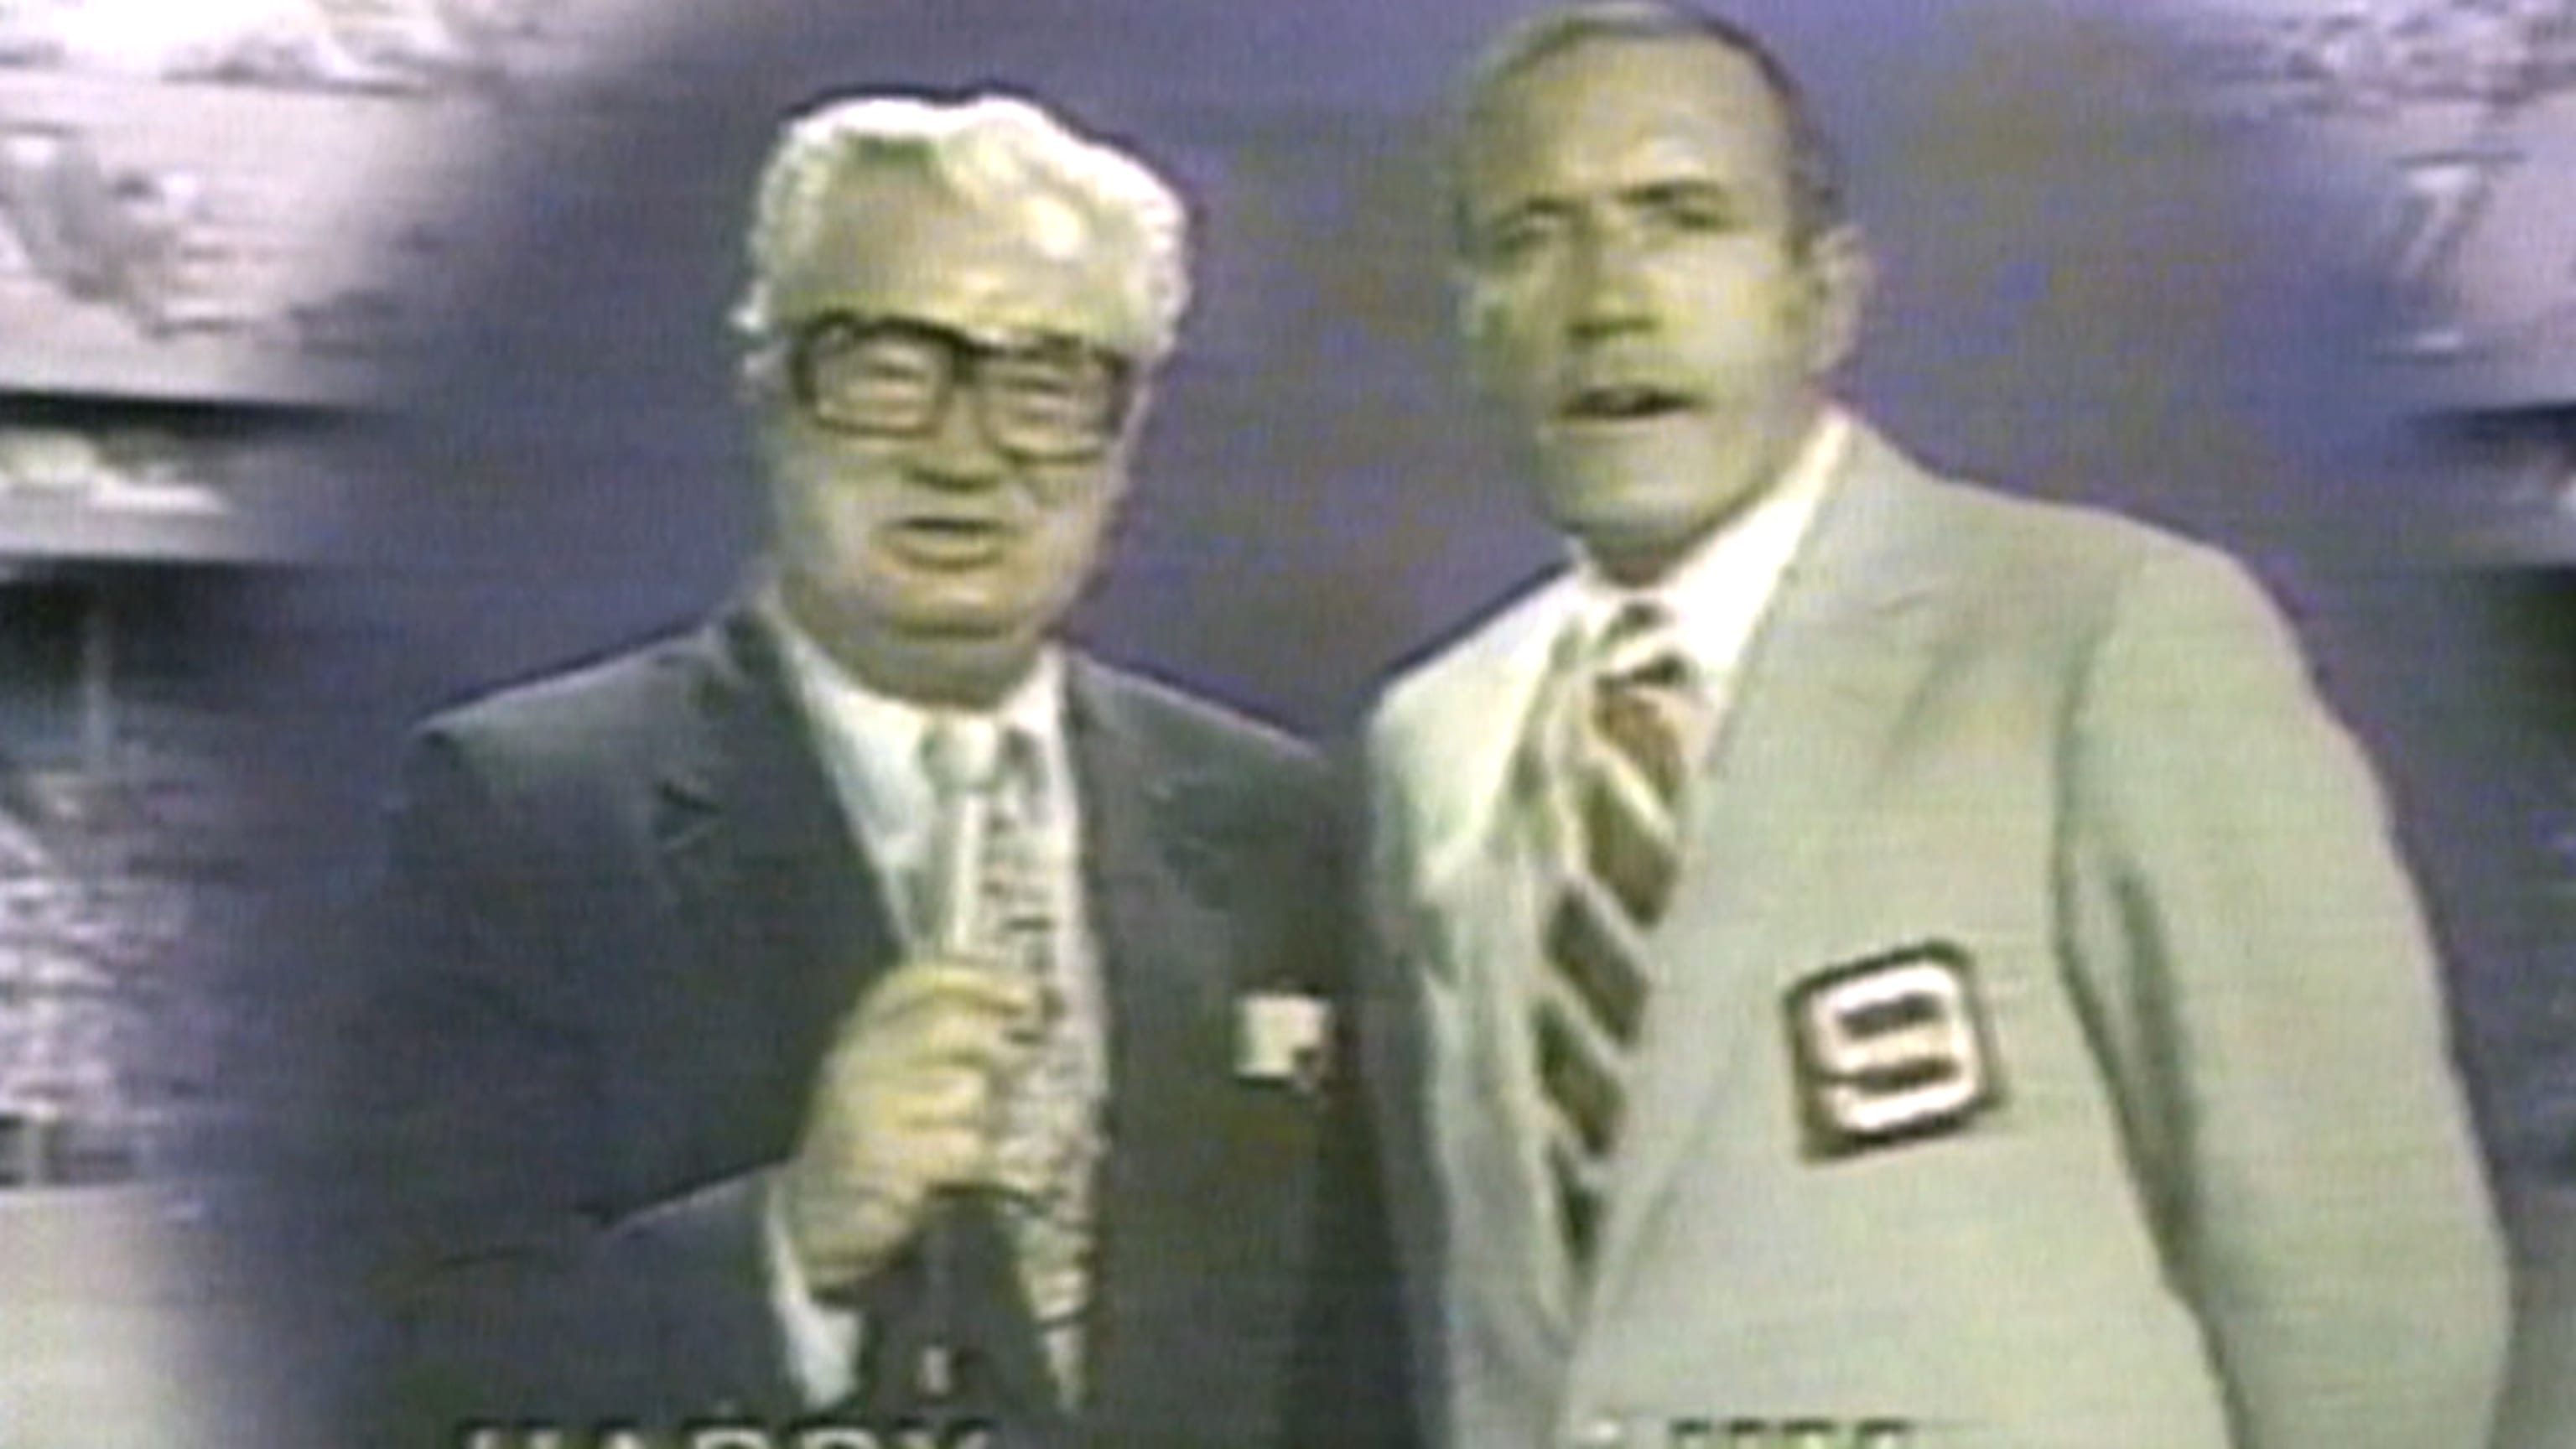 Harry Caray honored with special rendition of 'Take Me Out To The Ballgame